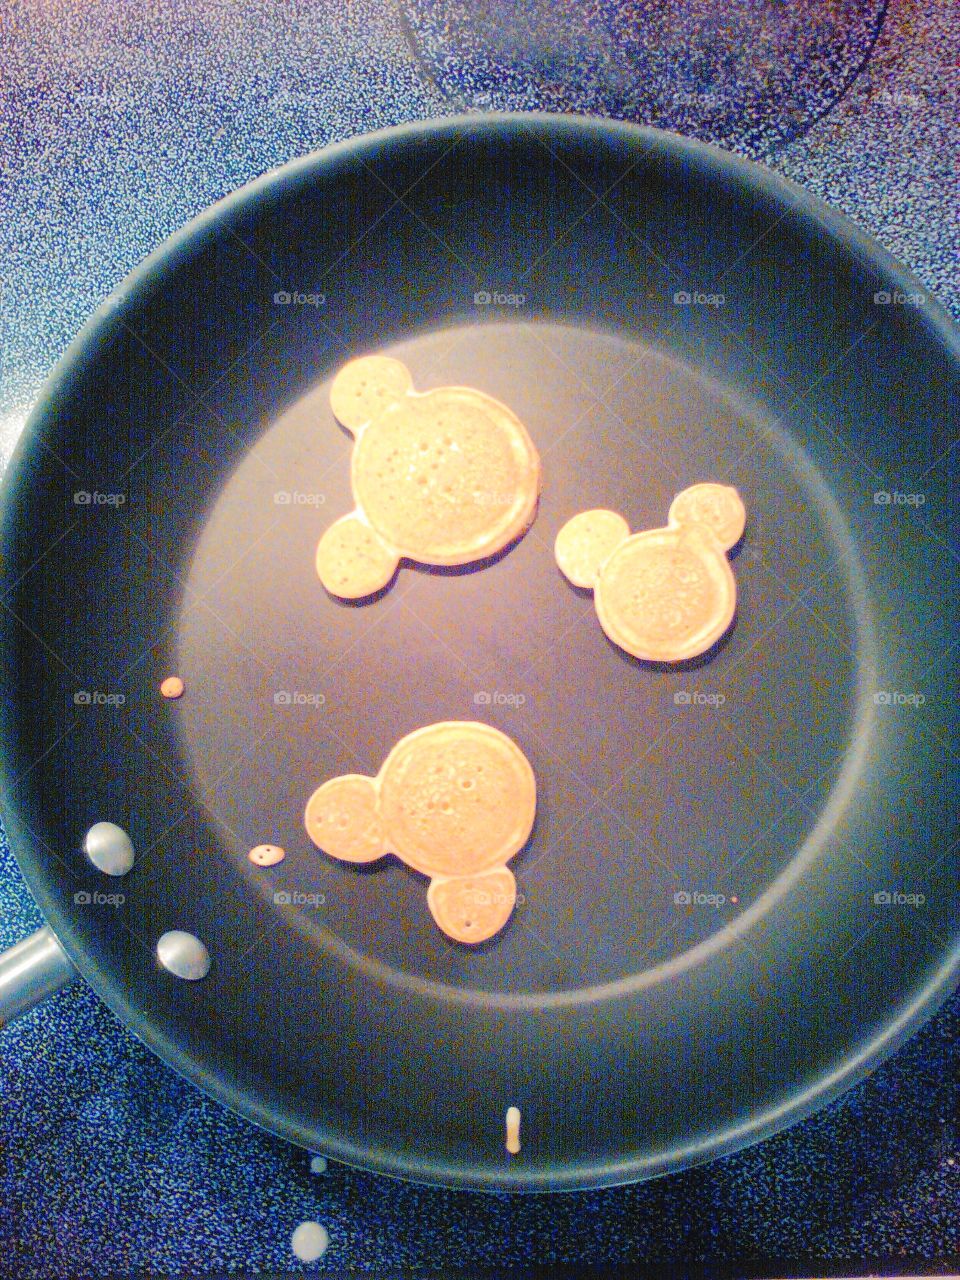 A Day at Disney World starts out with Mickey Mouse pancakes.